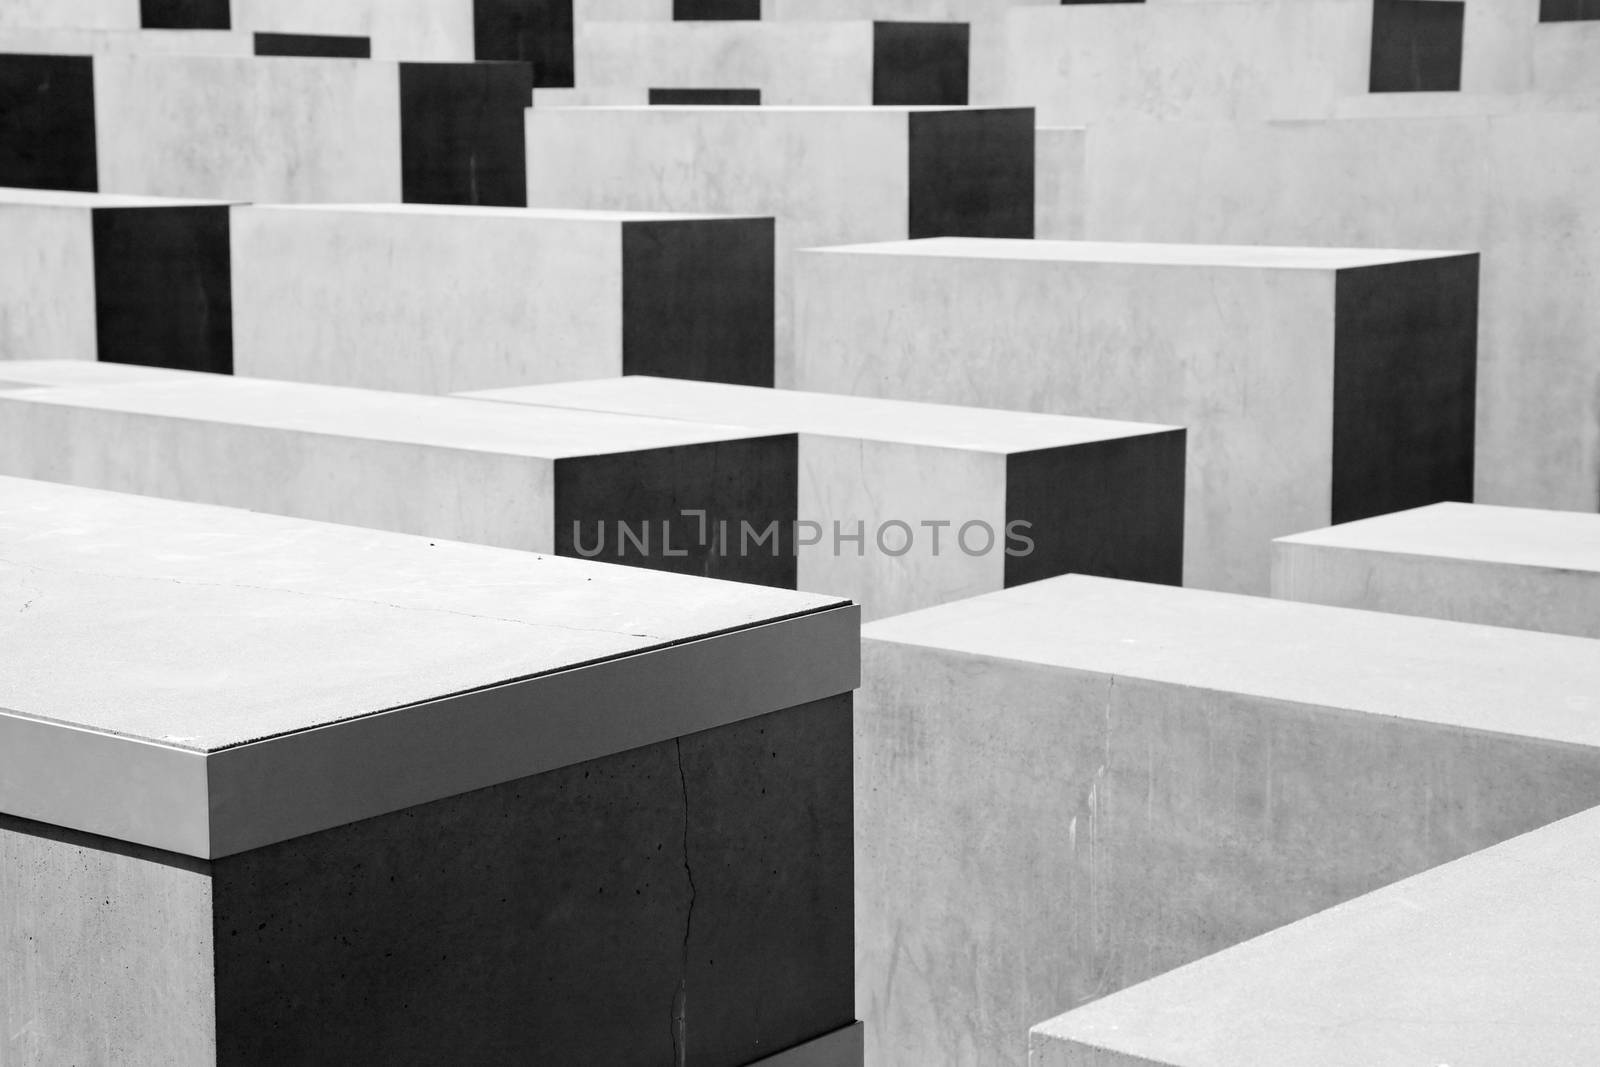  The Holocaust Memorial, Berlin, Germany by photocreo